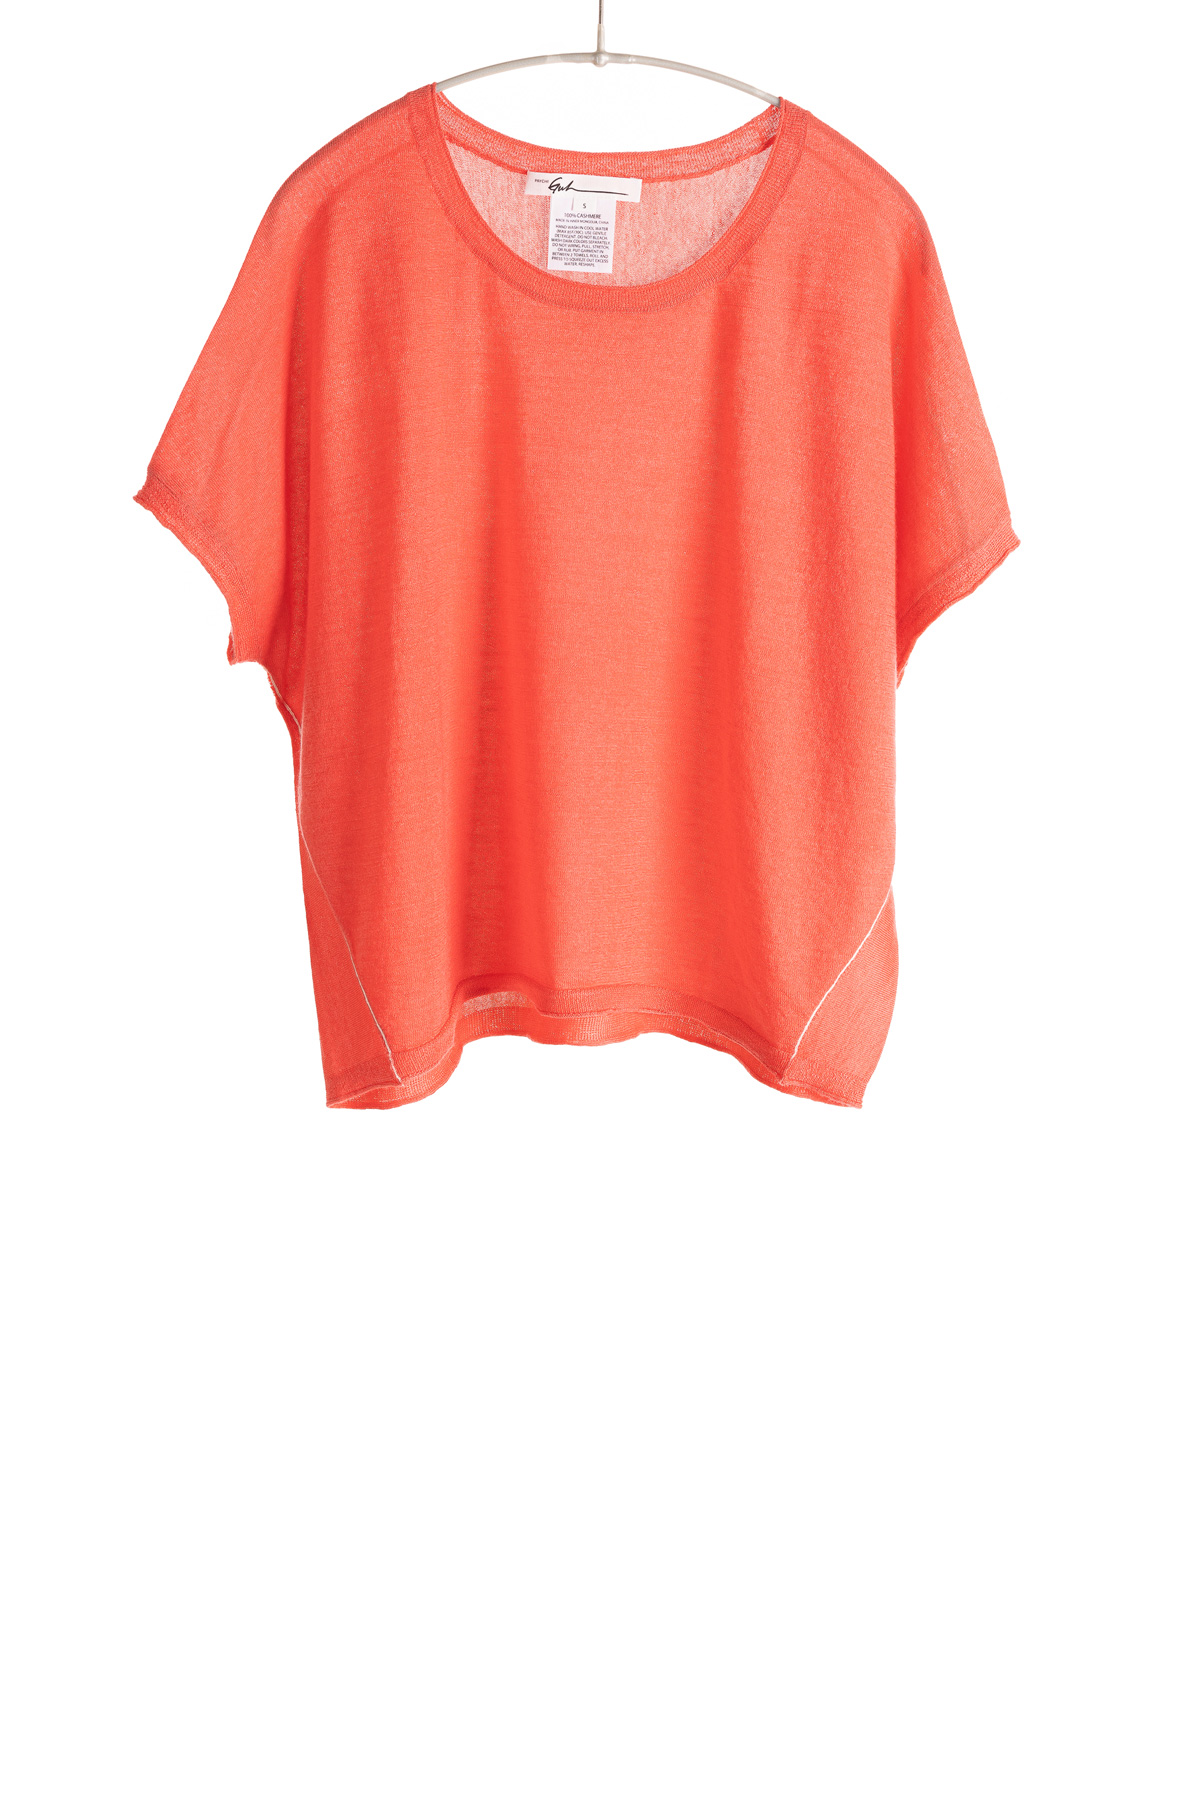 S409_Popover_Coral_H1Front